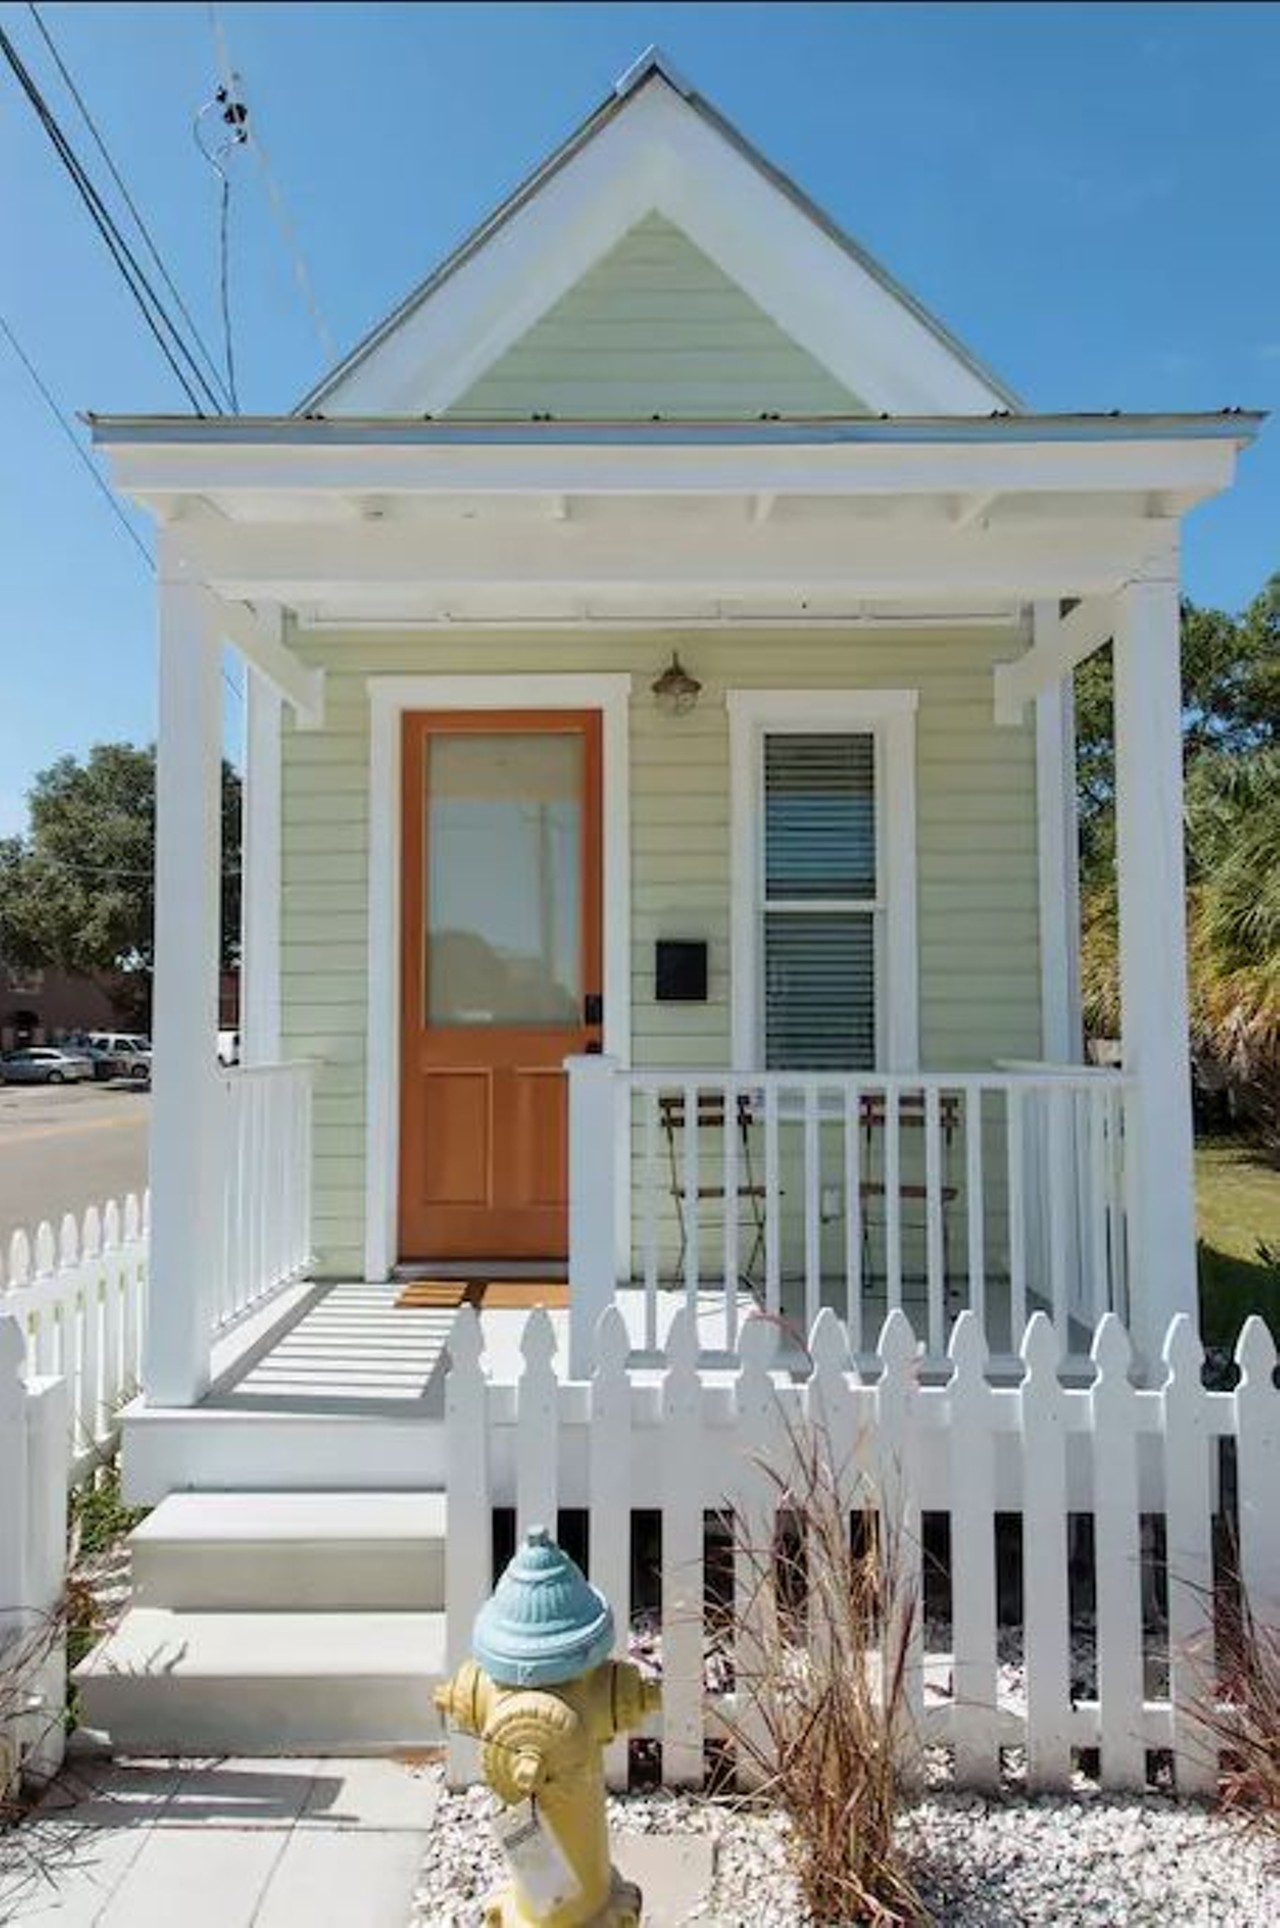 Tiny Cottage | Ybor City
$80/night
1 bed, 1 bath
This tiny cottage sits right in the National Historic District of Ybor City.